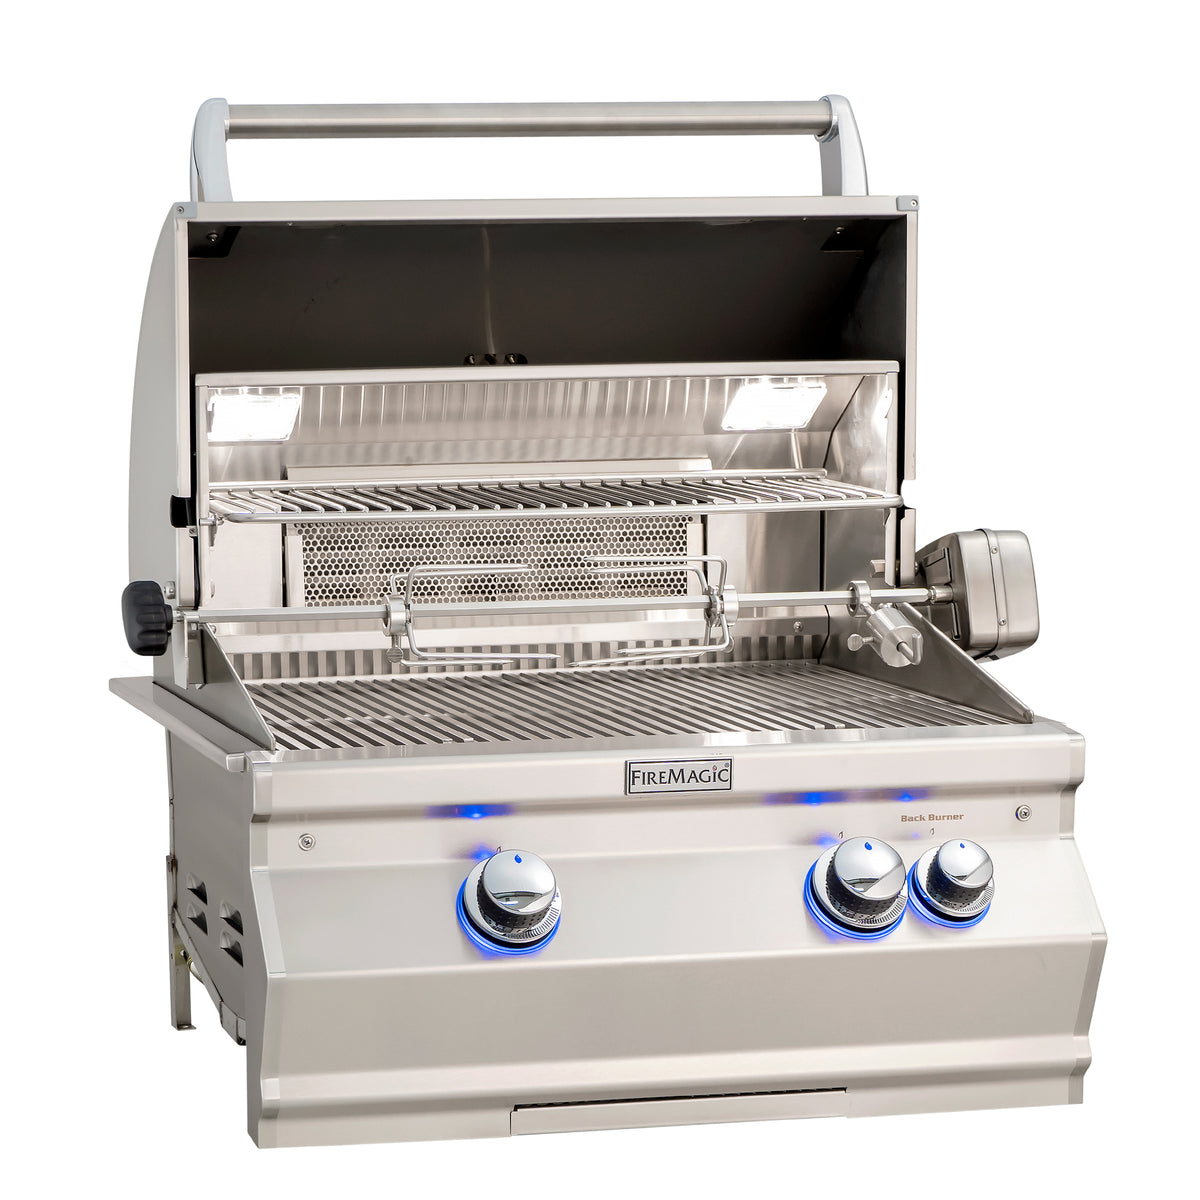 Fire Magic Aurora A430i Built-In Grill with Analog Thermometer